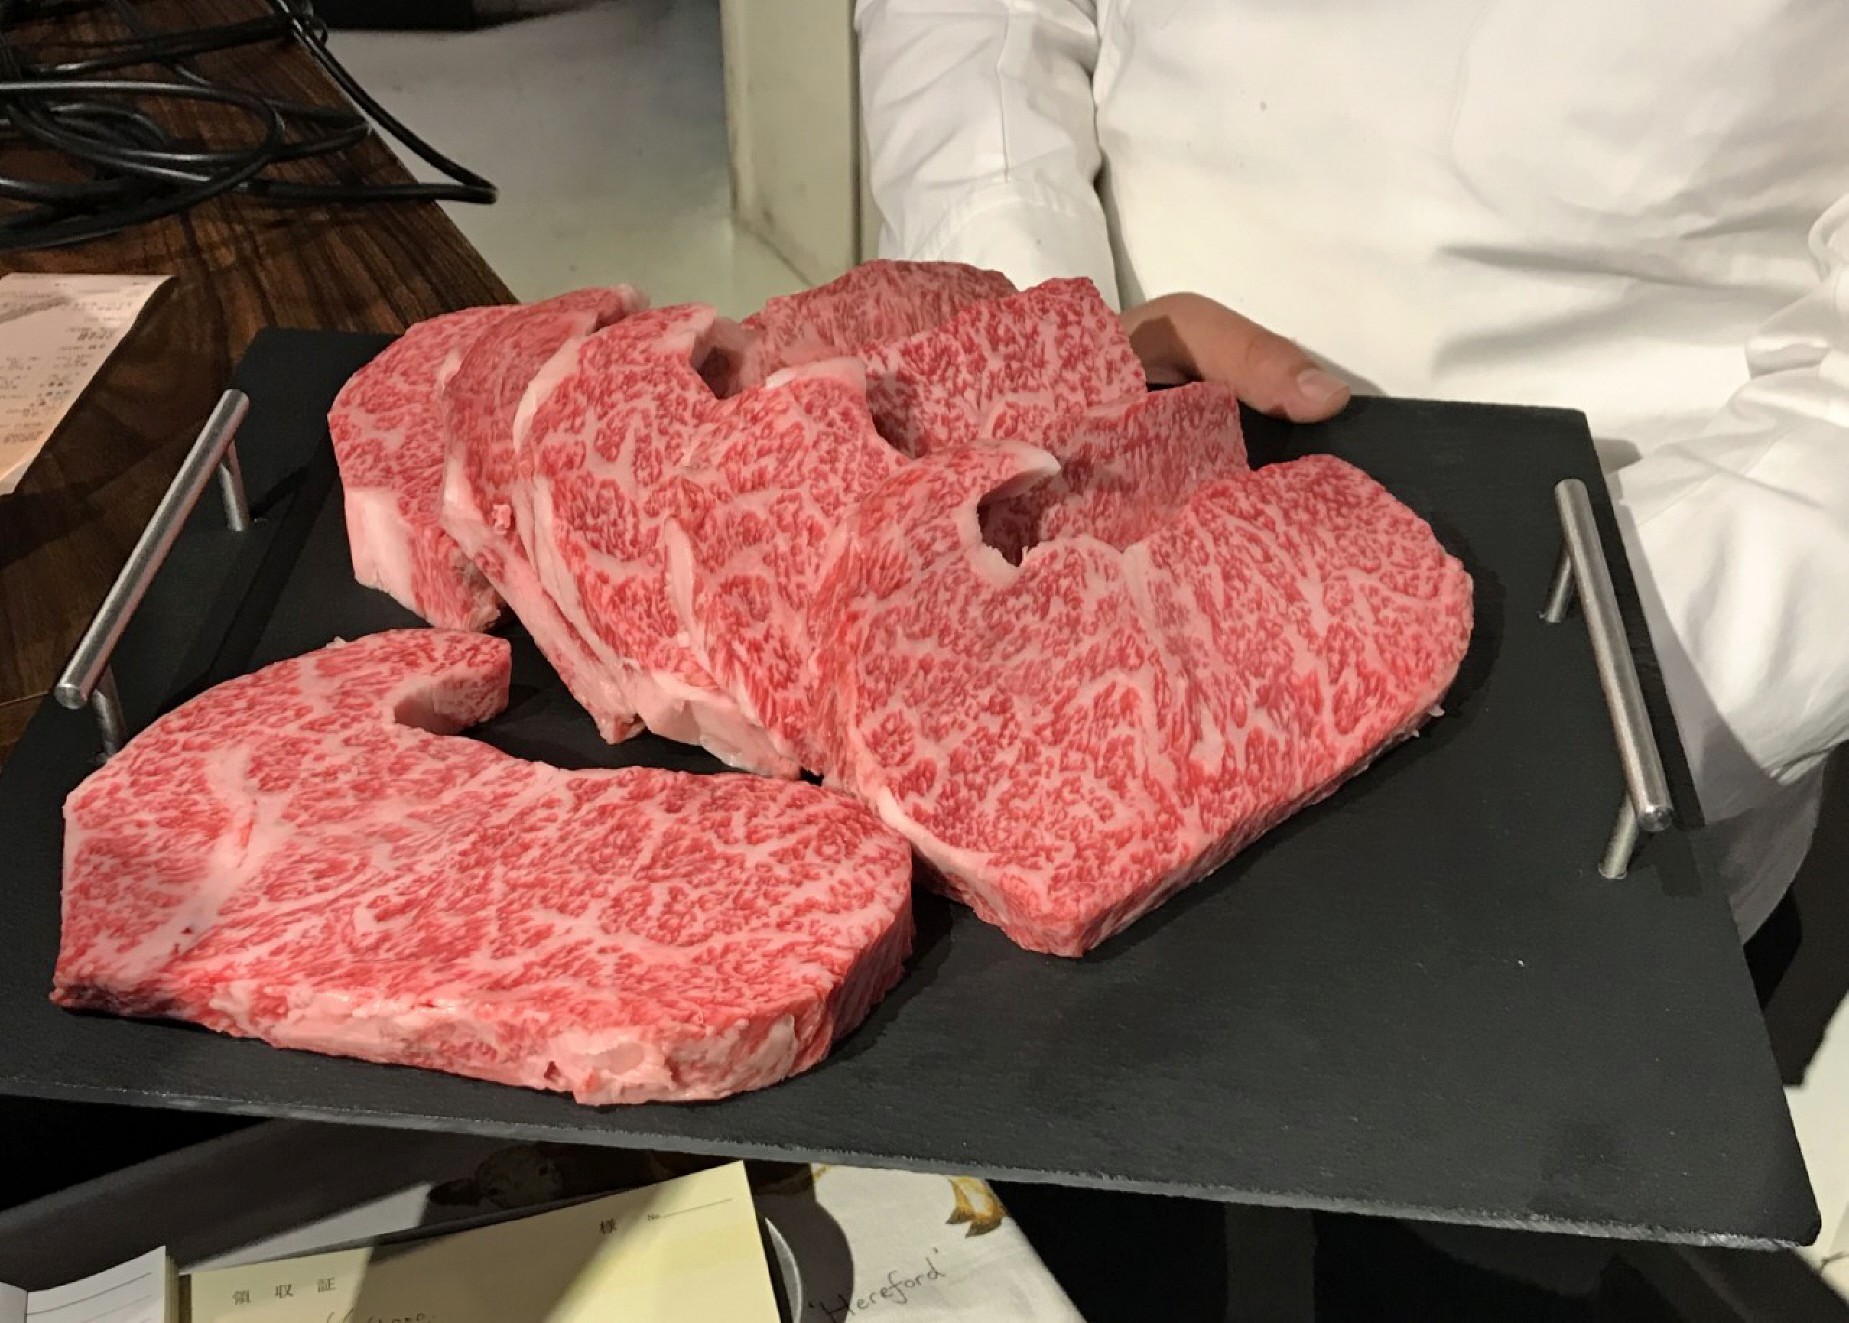 How does the wagyu steak Singapore have direct support from farmers?